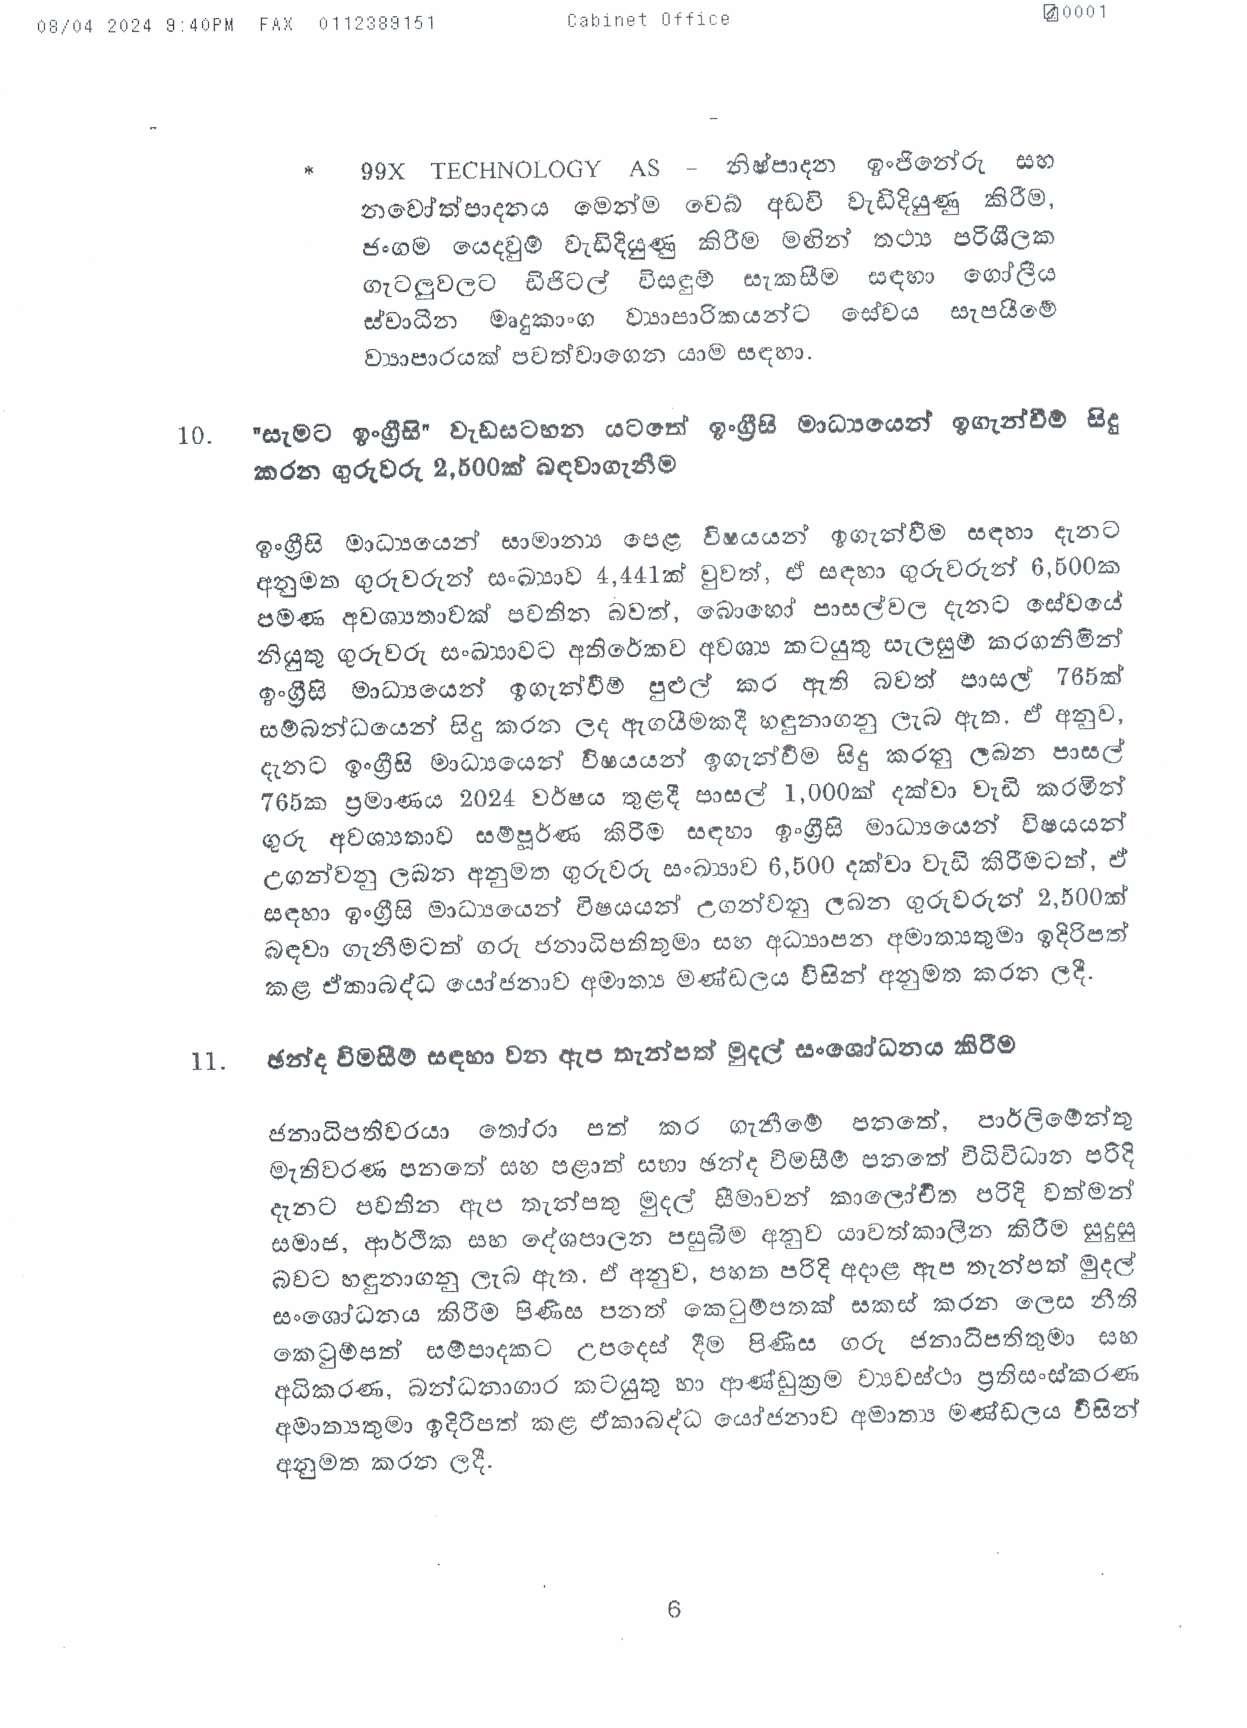 Cabinet Decision on 08.04.2024 page 006